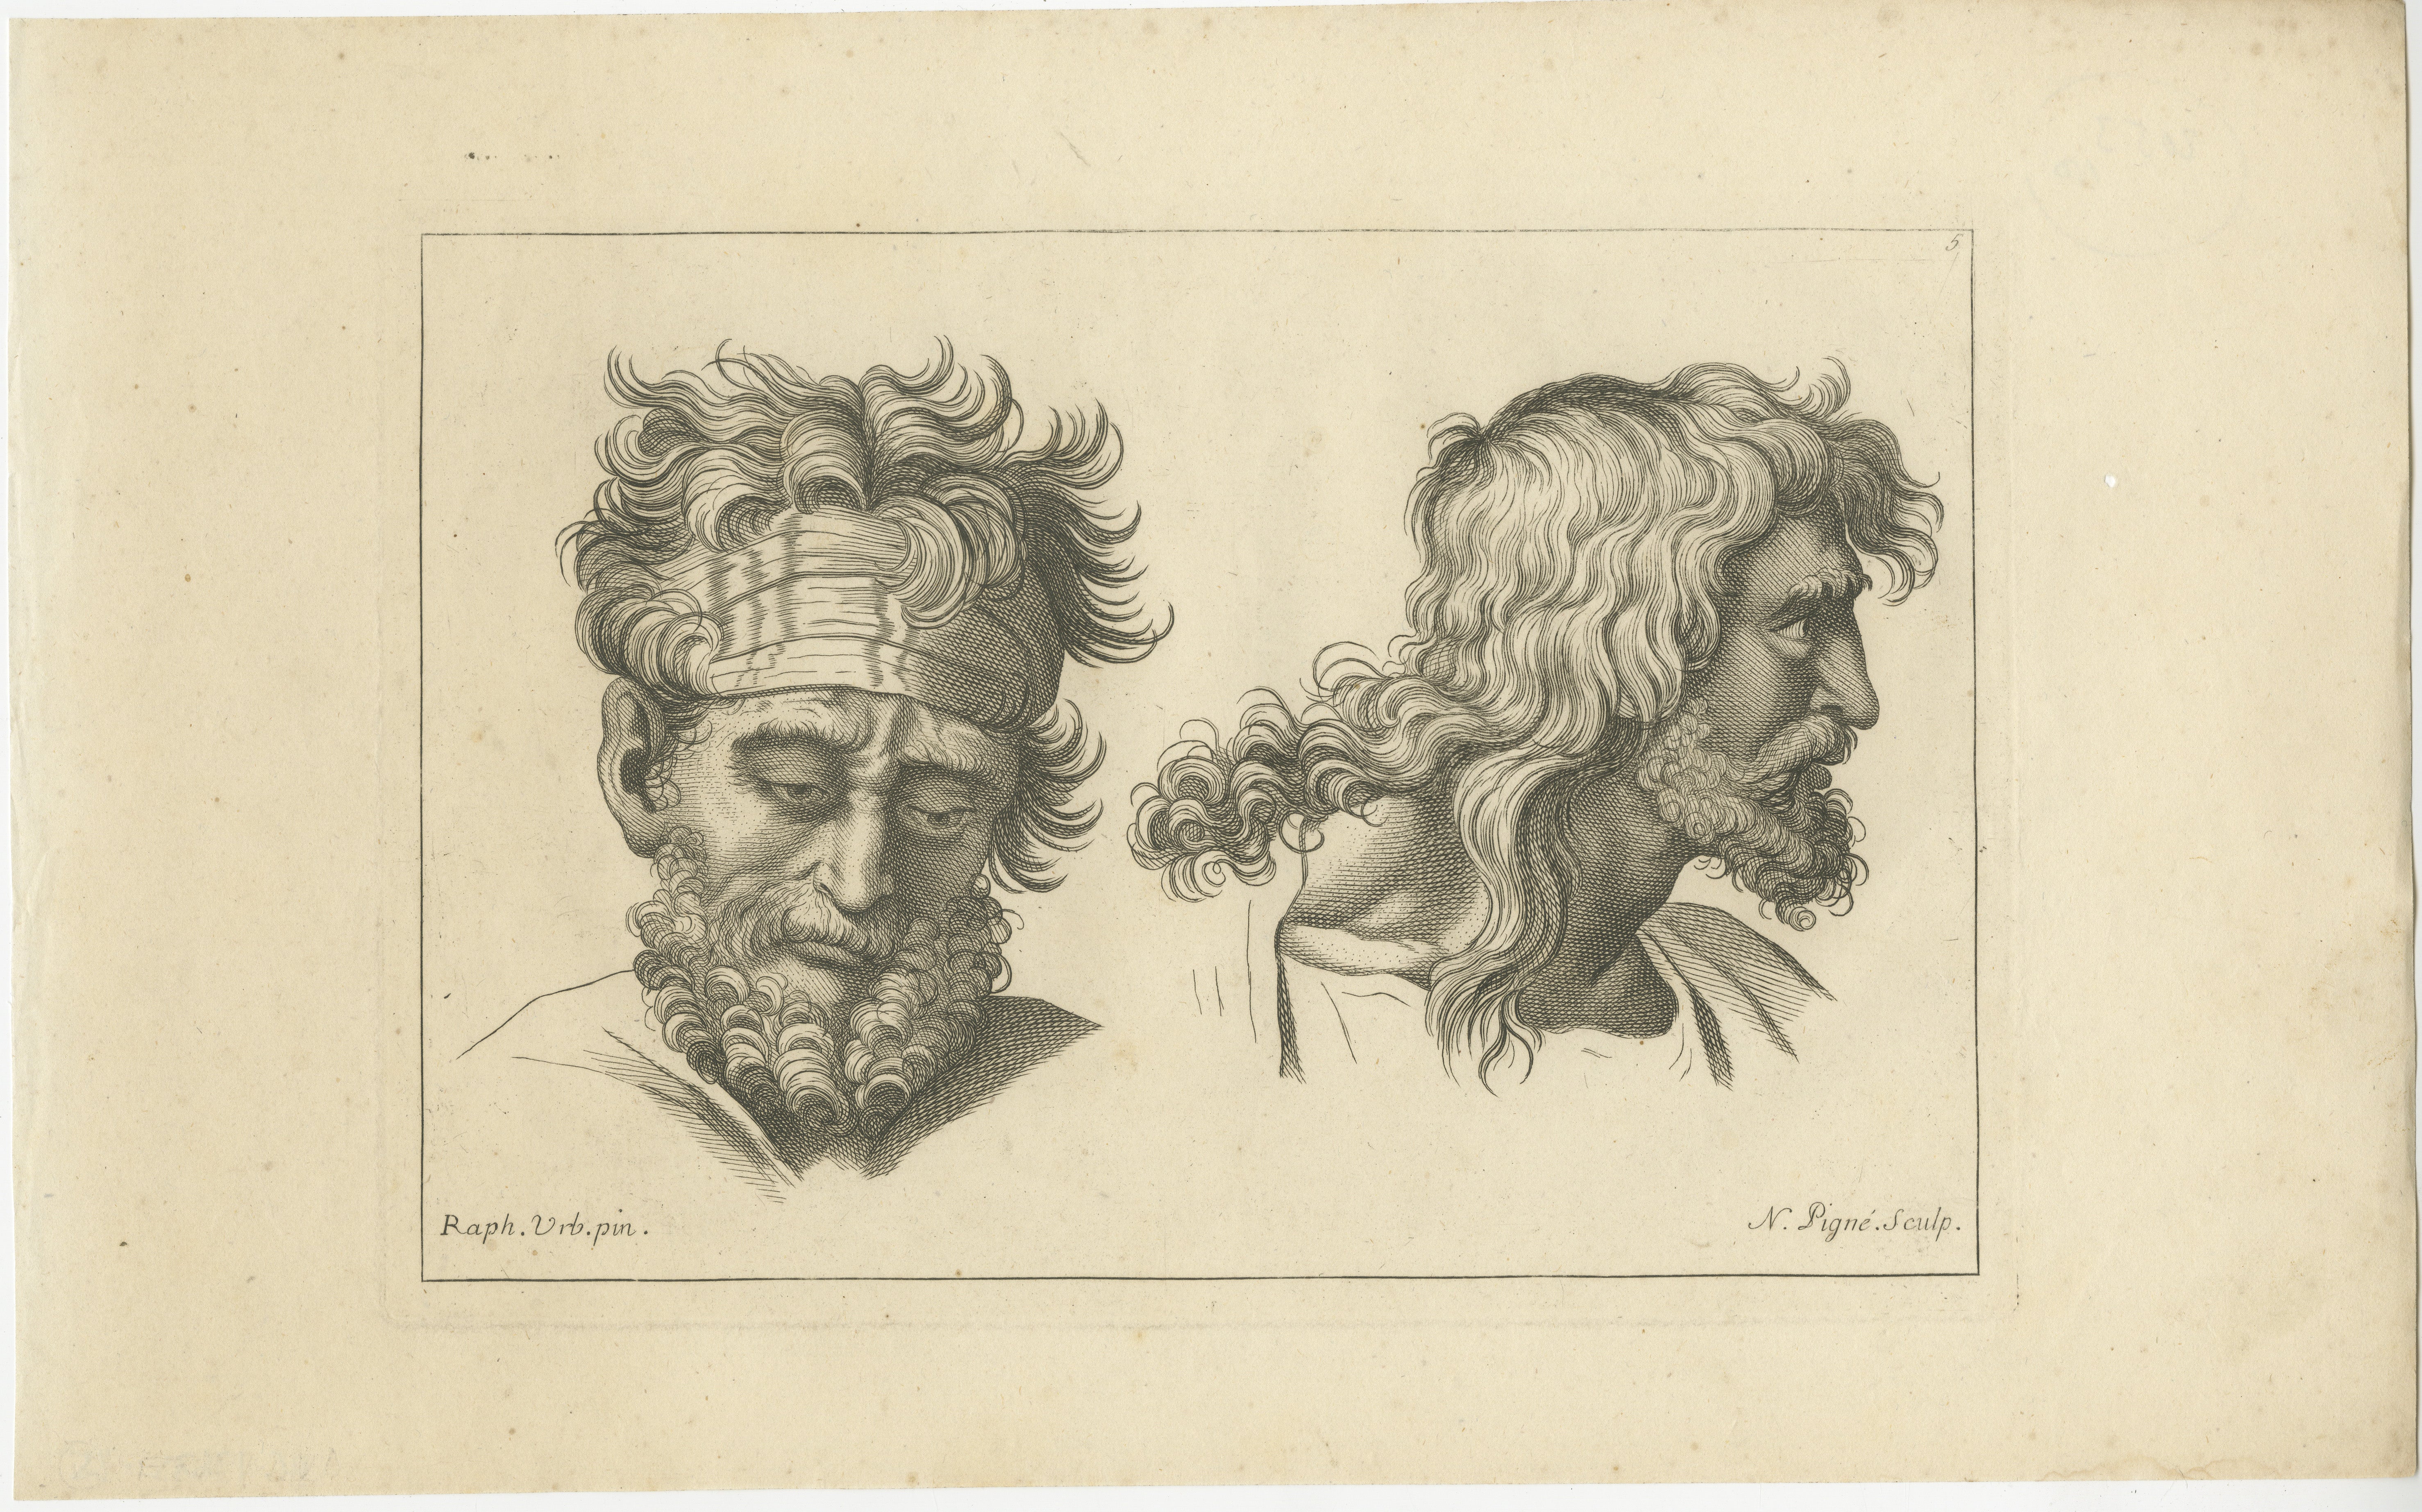 The engraving presented here exhibits two male figures, each bearing a unique expression and hairstyle, likely echoing the artistic style of Raphael's Renaissance works. On the left, we see a figure with a headband wrapped around his forehead, his